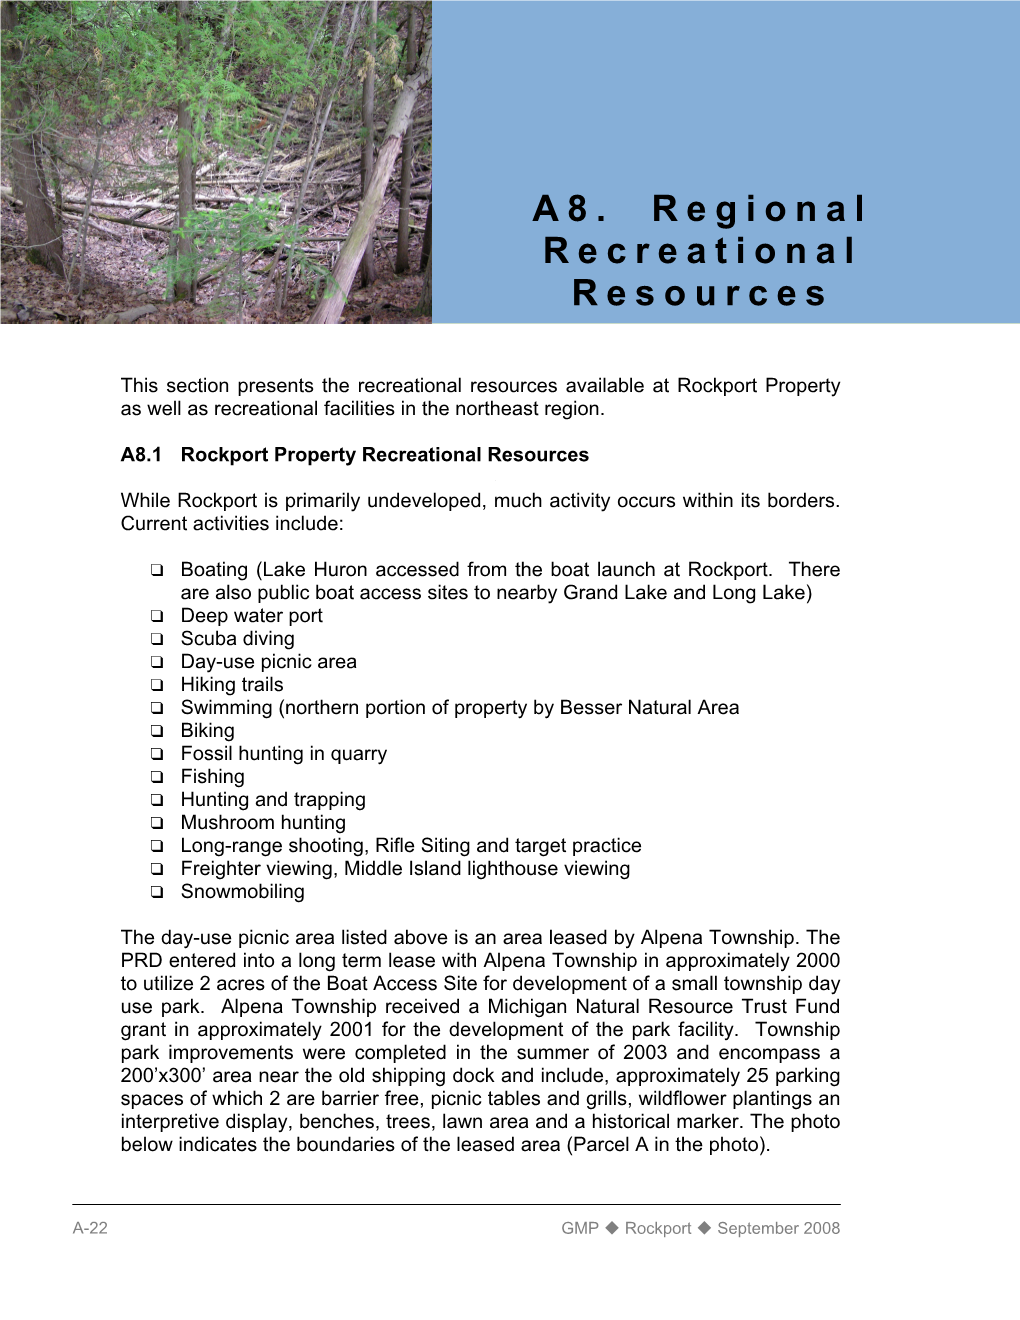 A8. Regional Recreational Resources